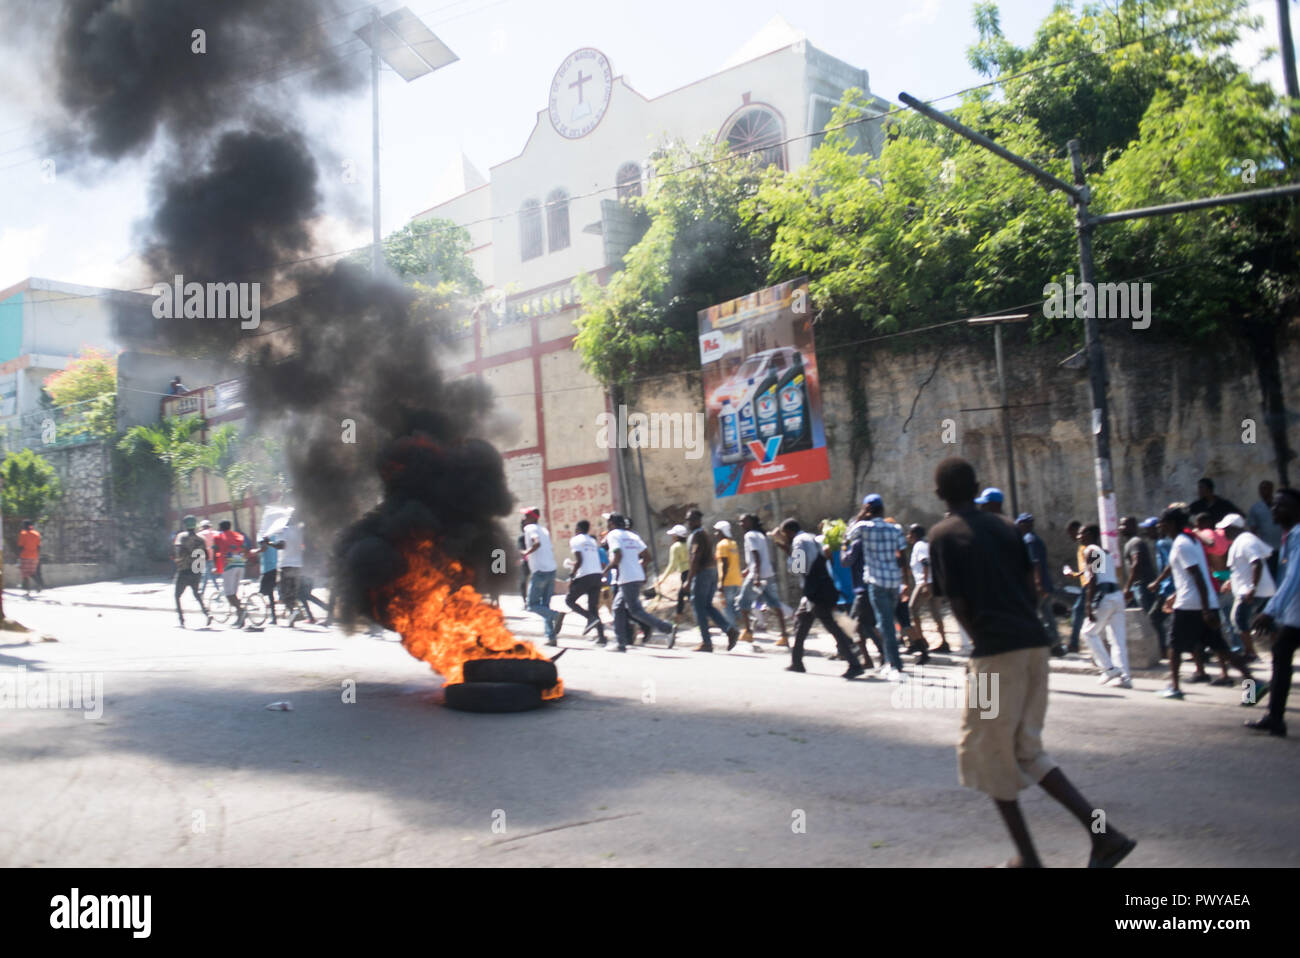 October 17, 2018 - Port-Au-Prince, Ouest, Haiti - Burning tires in the streets as tens of thousands of protesters march down the streets. Protesters gathered to demonstrate against the $3.8 billion that the government and private firms have been accused of embezzling from Venezuela's subsidized PetroCaribe oil program. The revenue was supposed to go toward financing economic and social programs. The PetroCaribe Challenge was started after Haitian filmmaker Gilbert Mirambeau Jr. posted on social media asking: 'Kot KÃ²b PetroCaribe a,'' or 'Where did the PetroCaribe money go?'' With a la Stock Photo